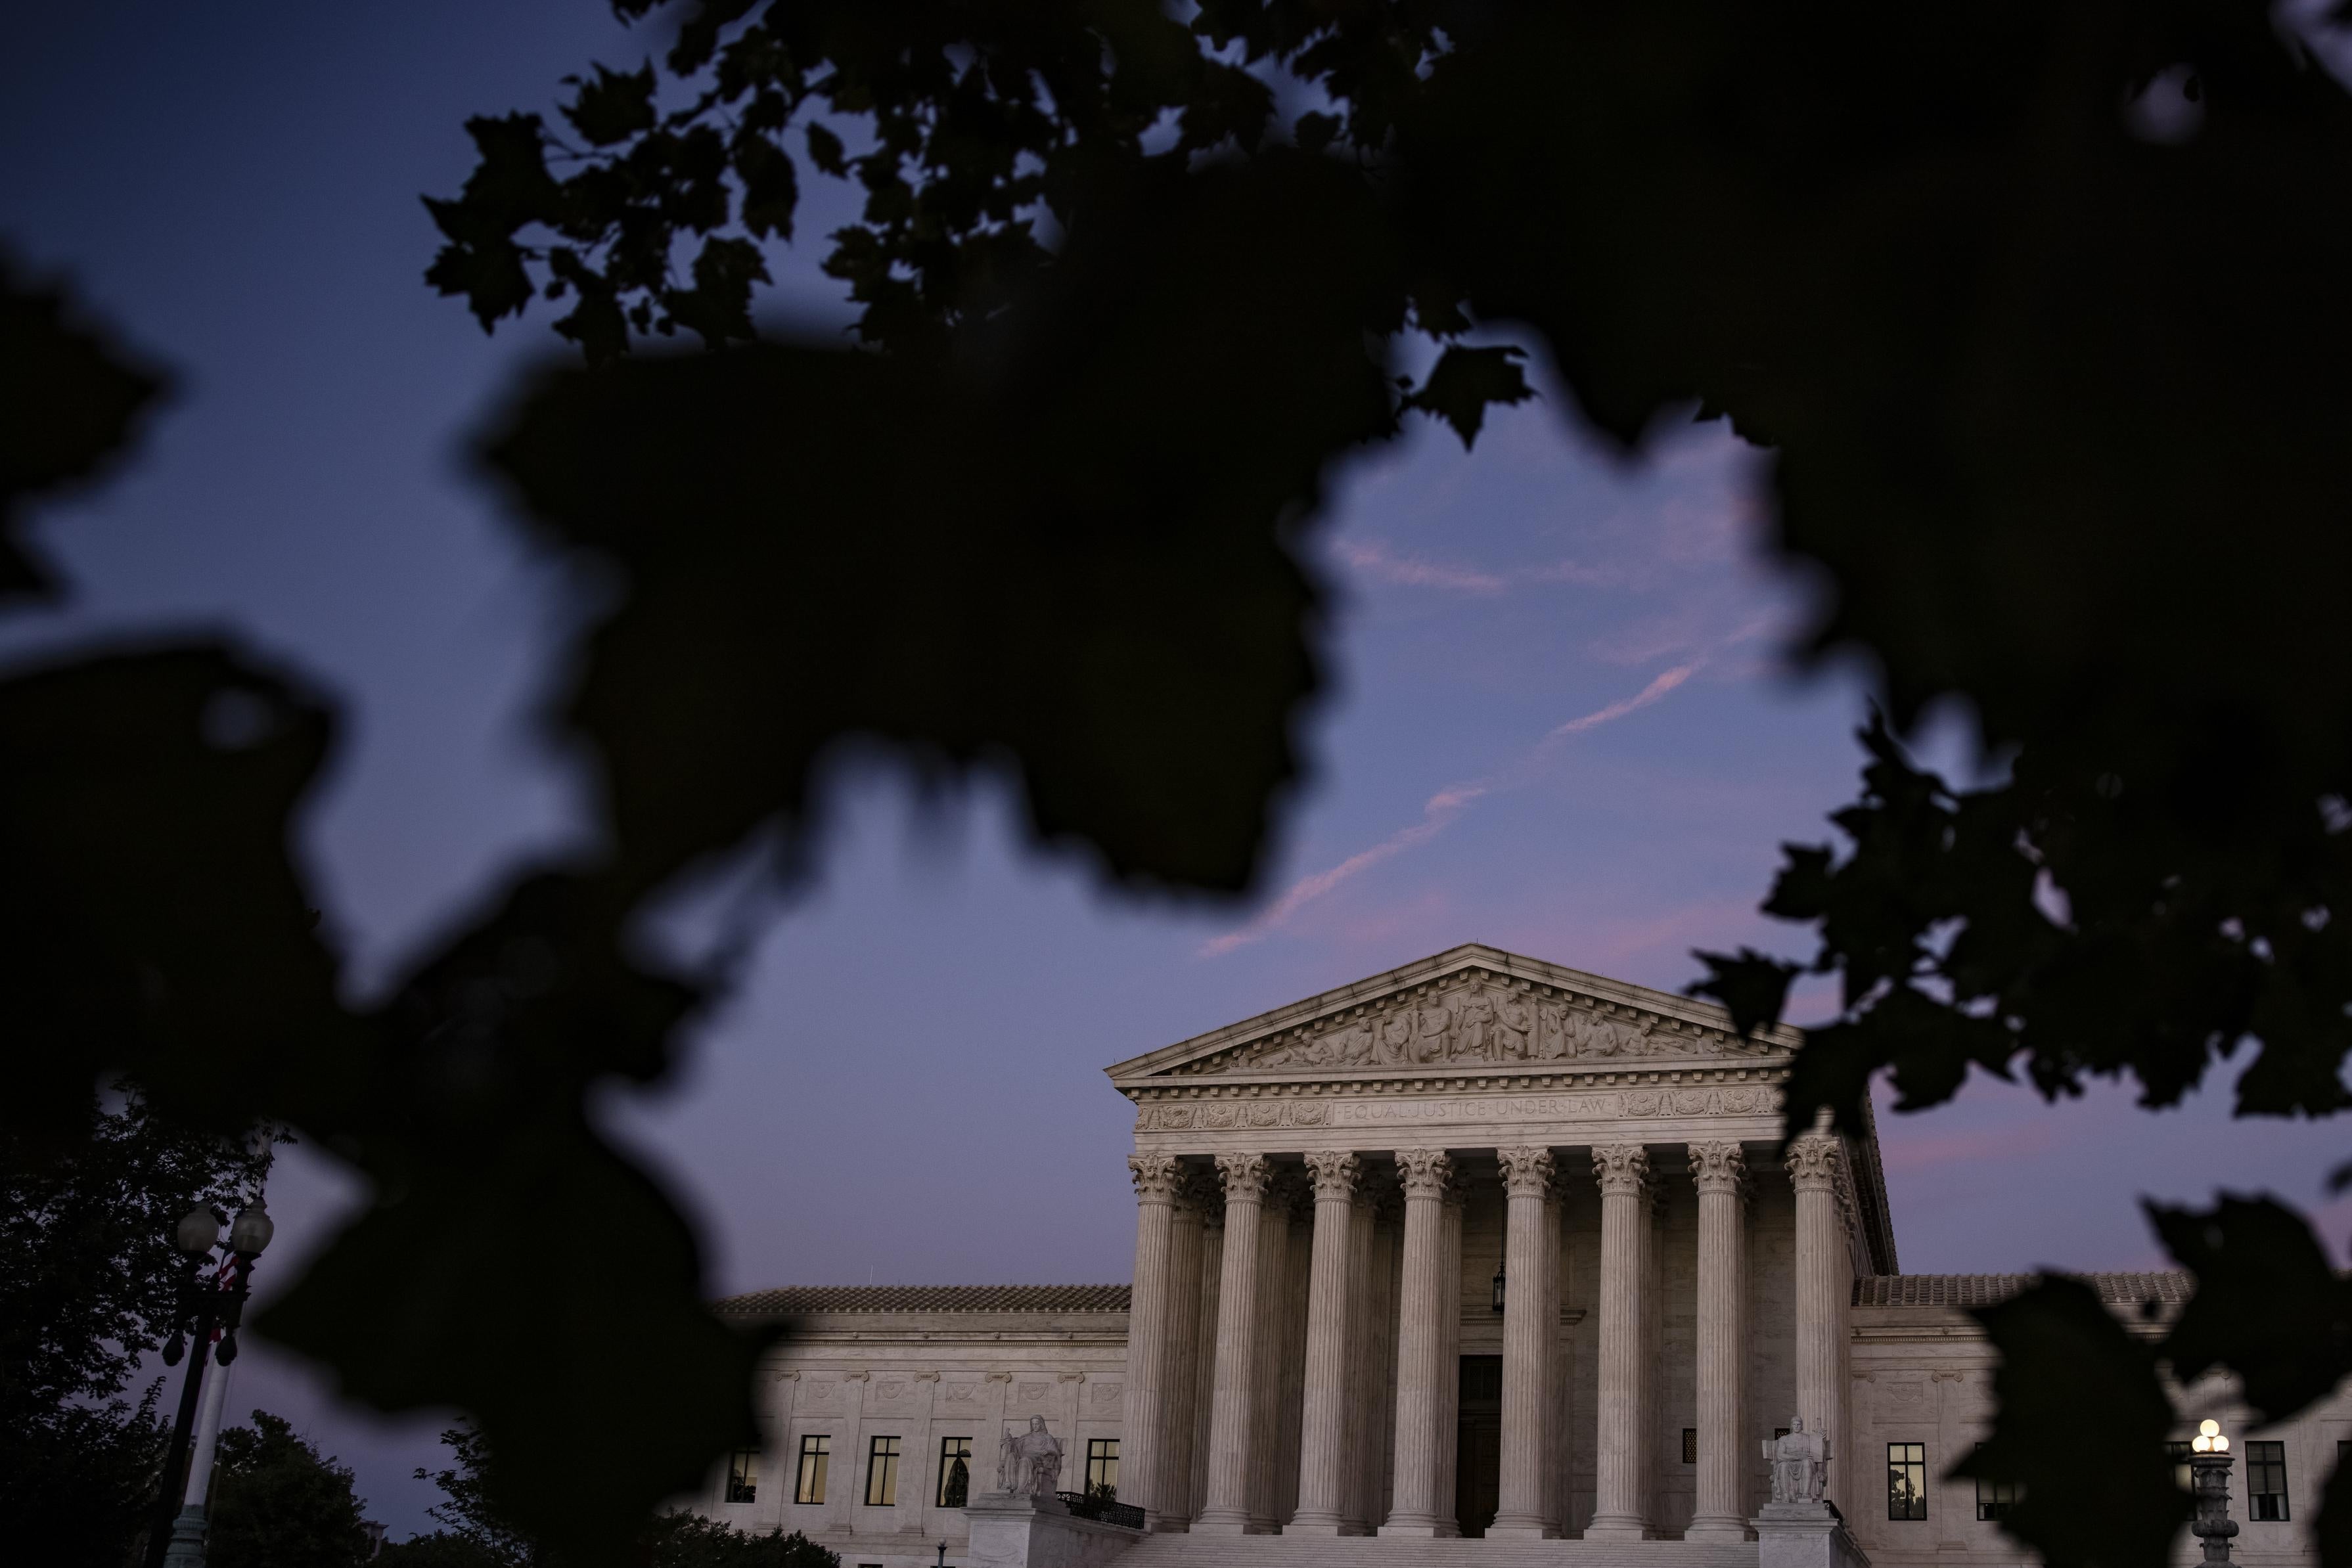 The Supreme Court building at sunset.